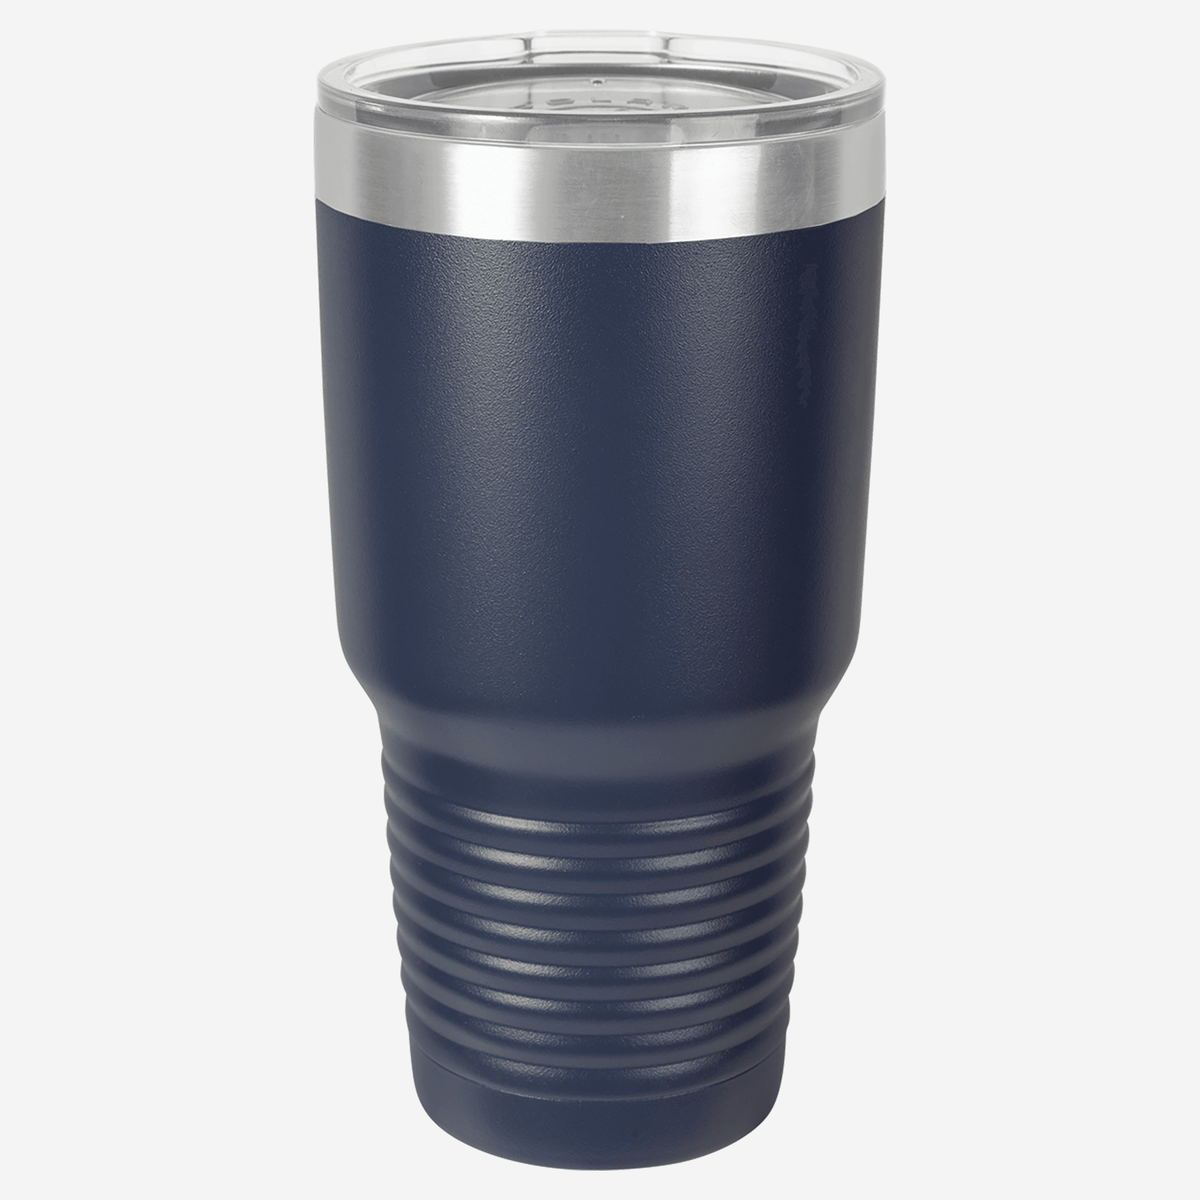 30 oz. navy blue stainless steel tumbler with silver ring at top clear lid